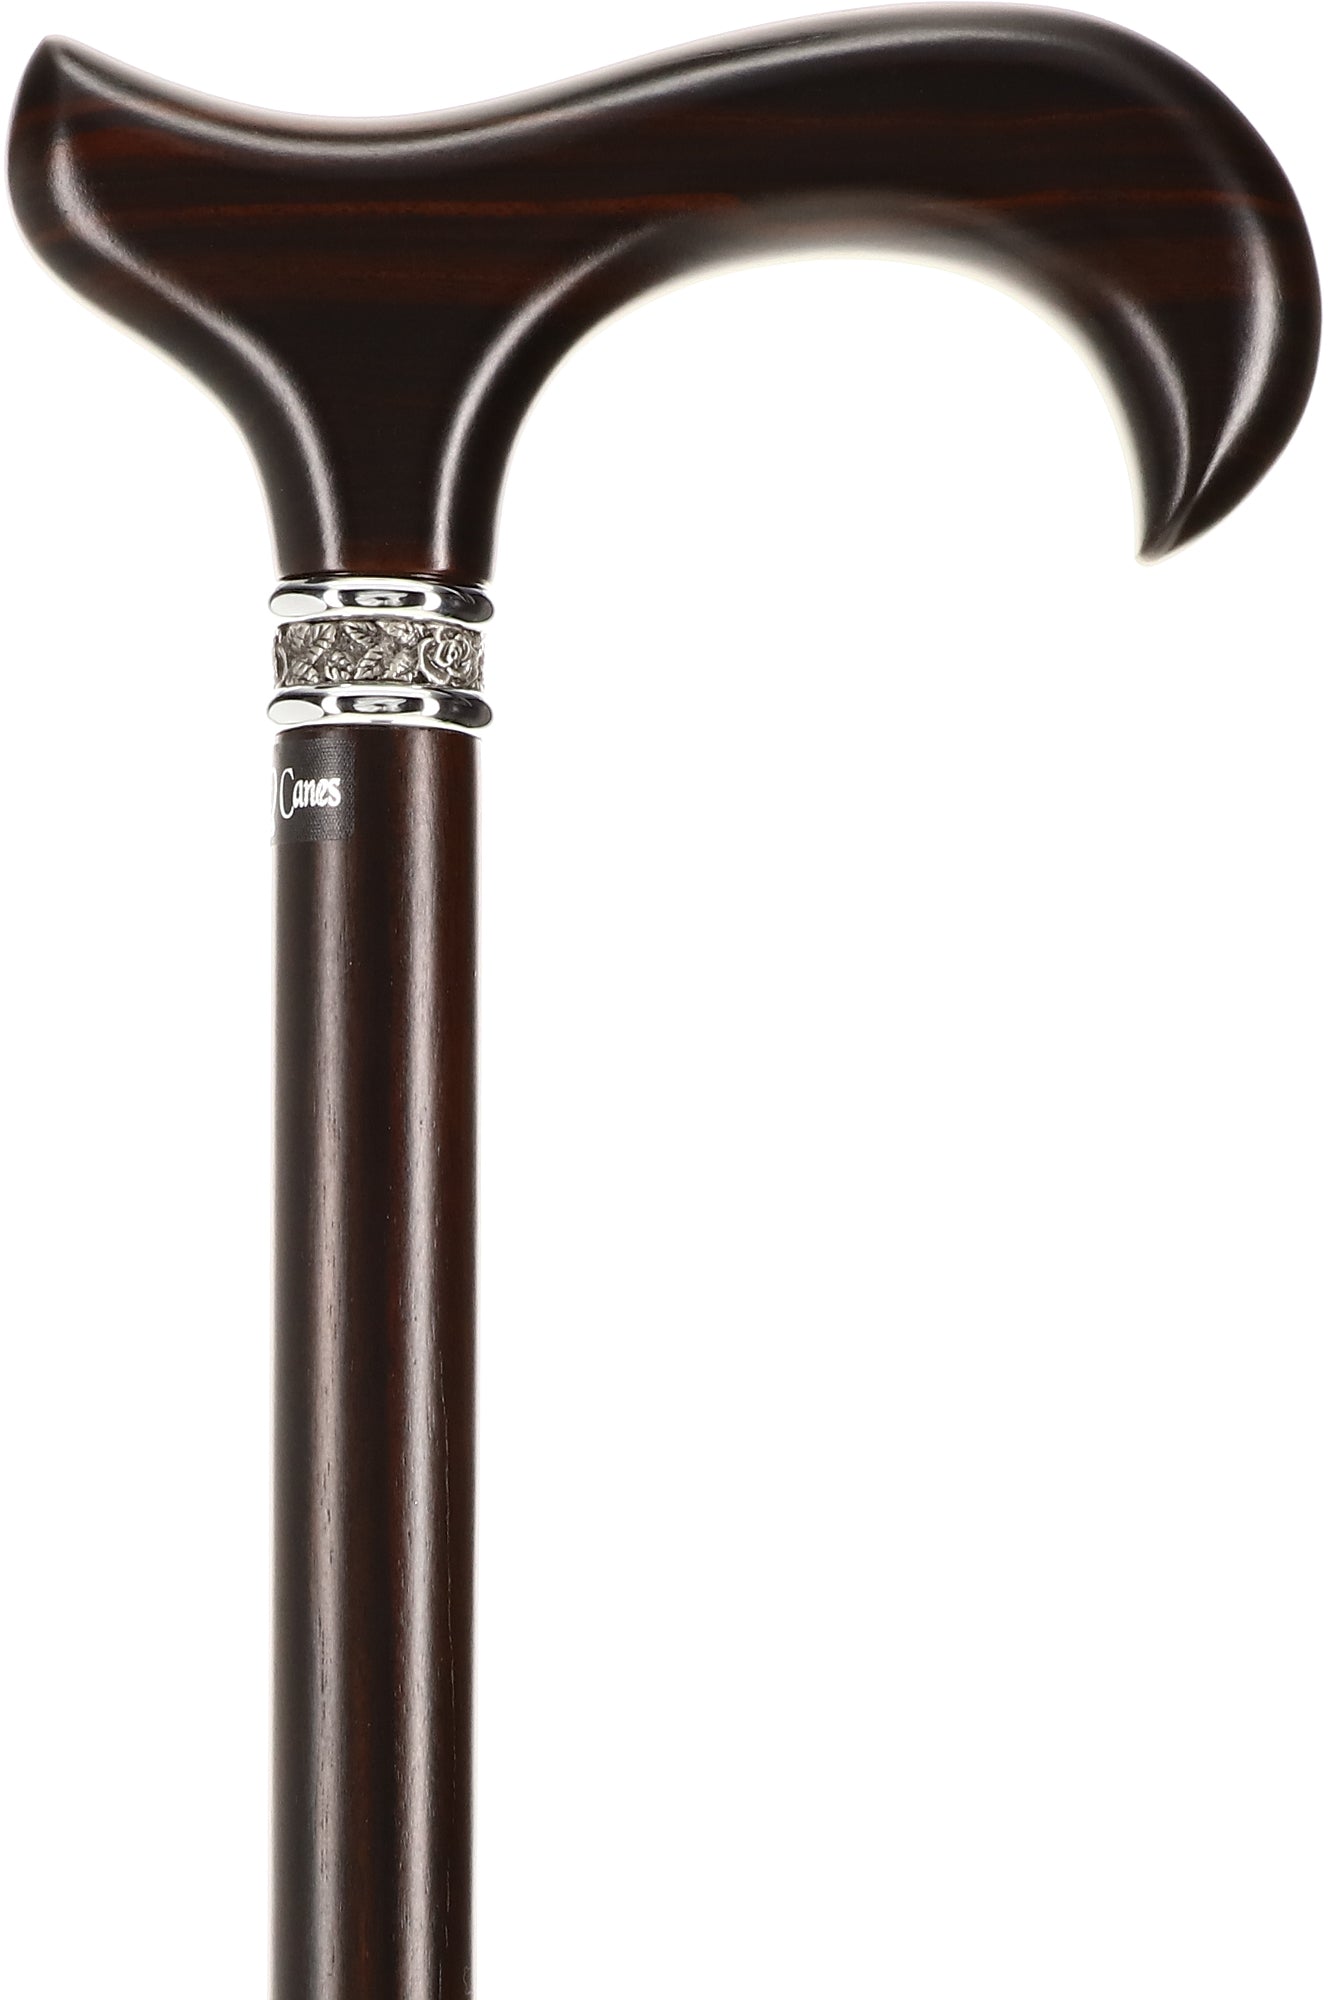 Solid Wooden Walking Cane Wood Canes Wooden Walking Stick, 40% OFF